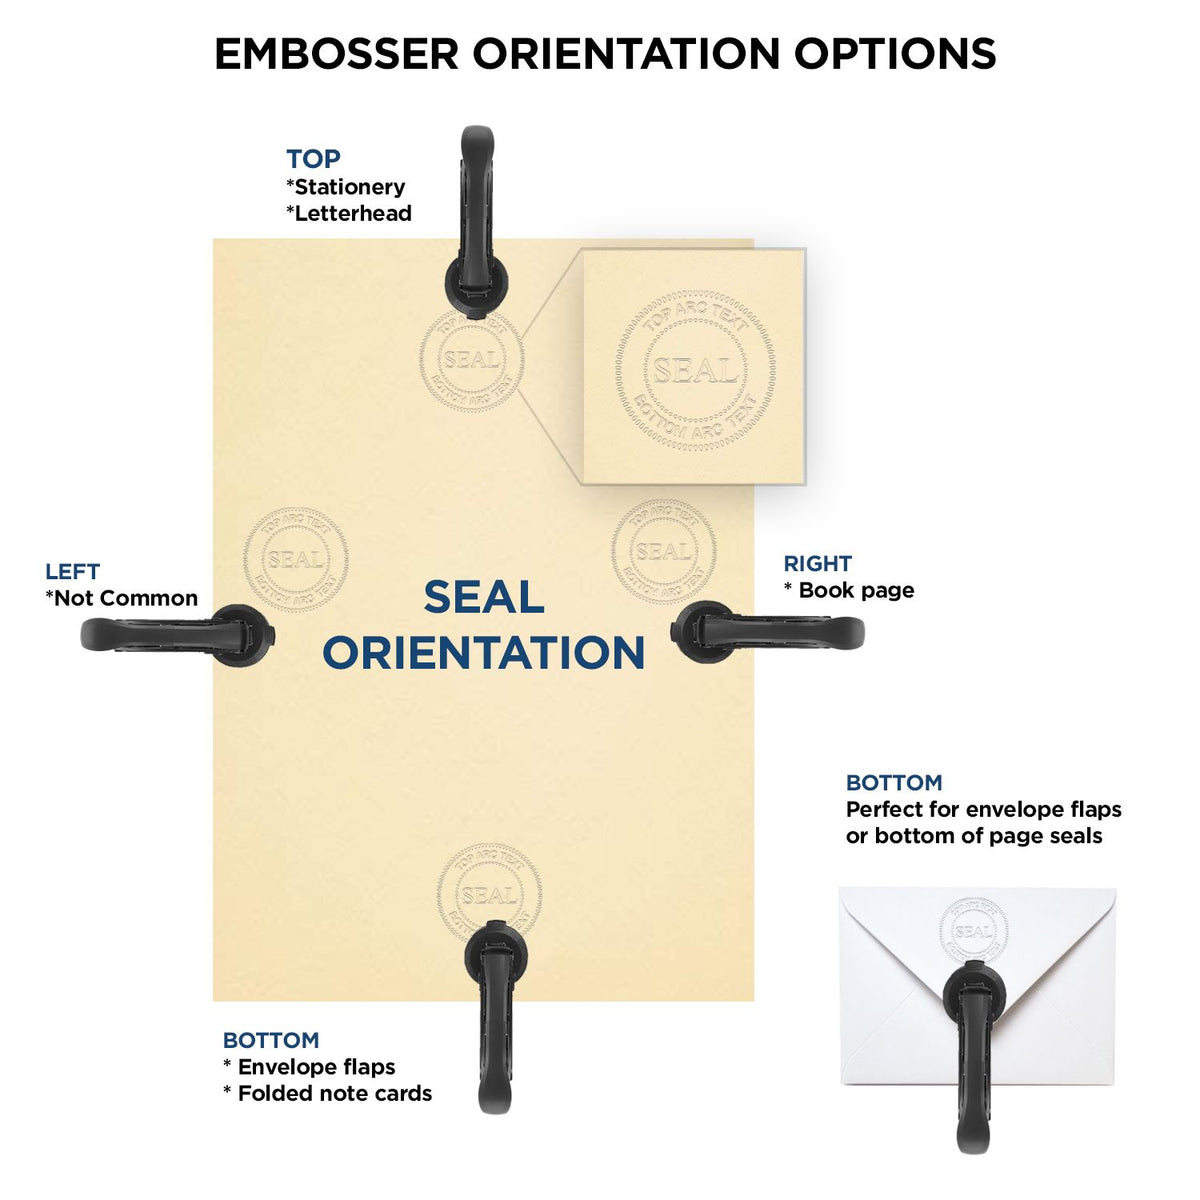 An infographic for the Idaho Geologist Desk Seal showing embosser orientation, this is showing examples of a top, bottom, right and left insert.